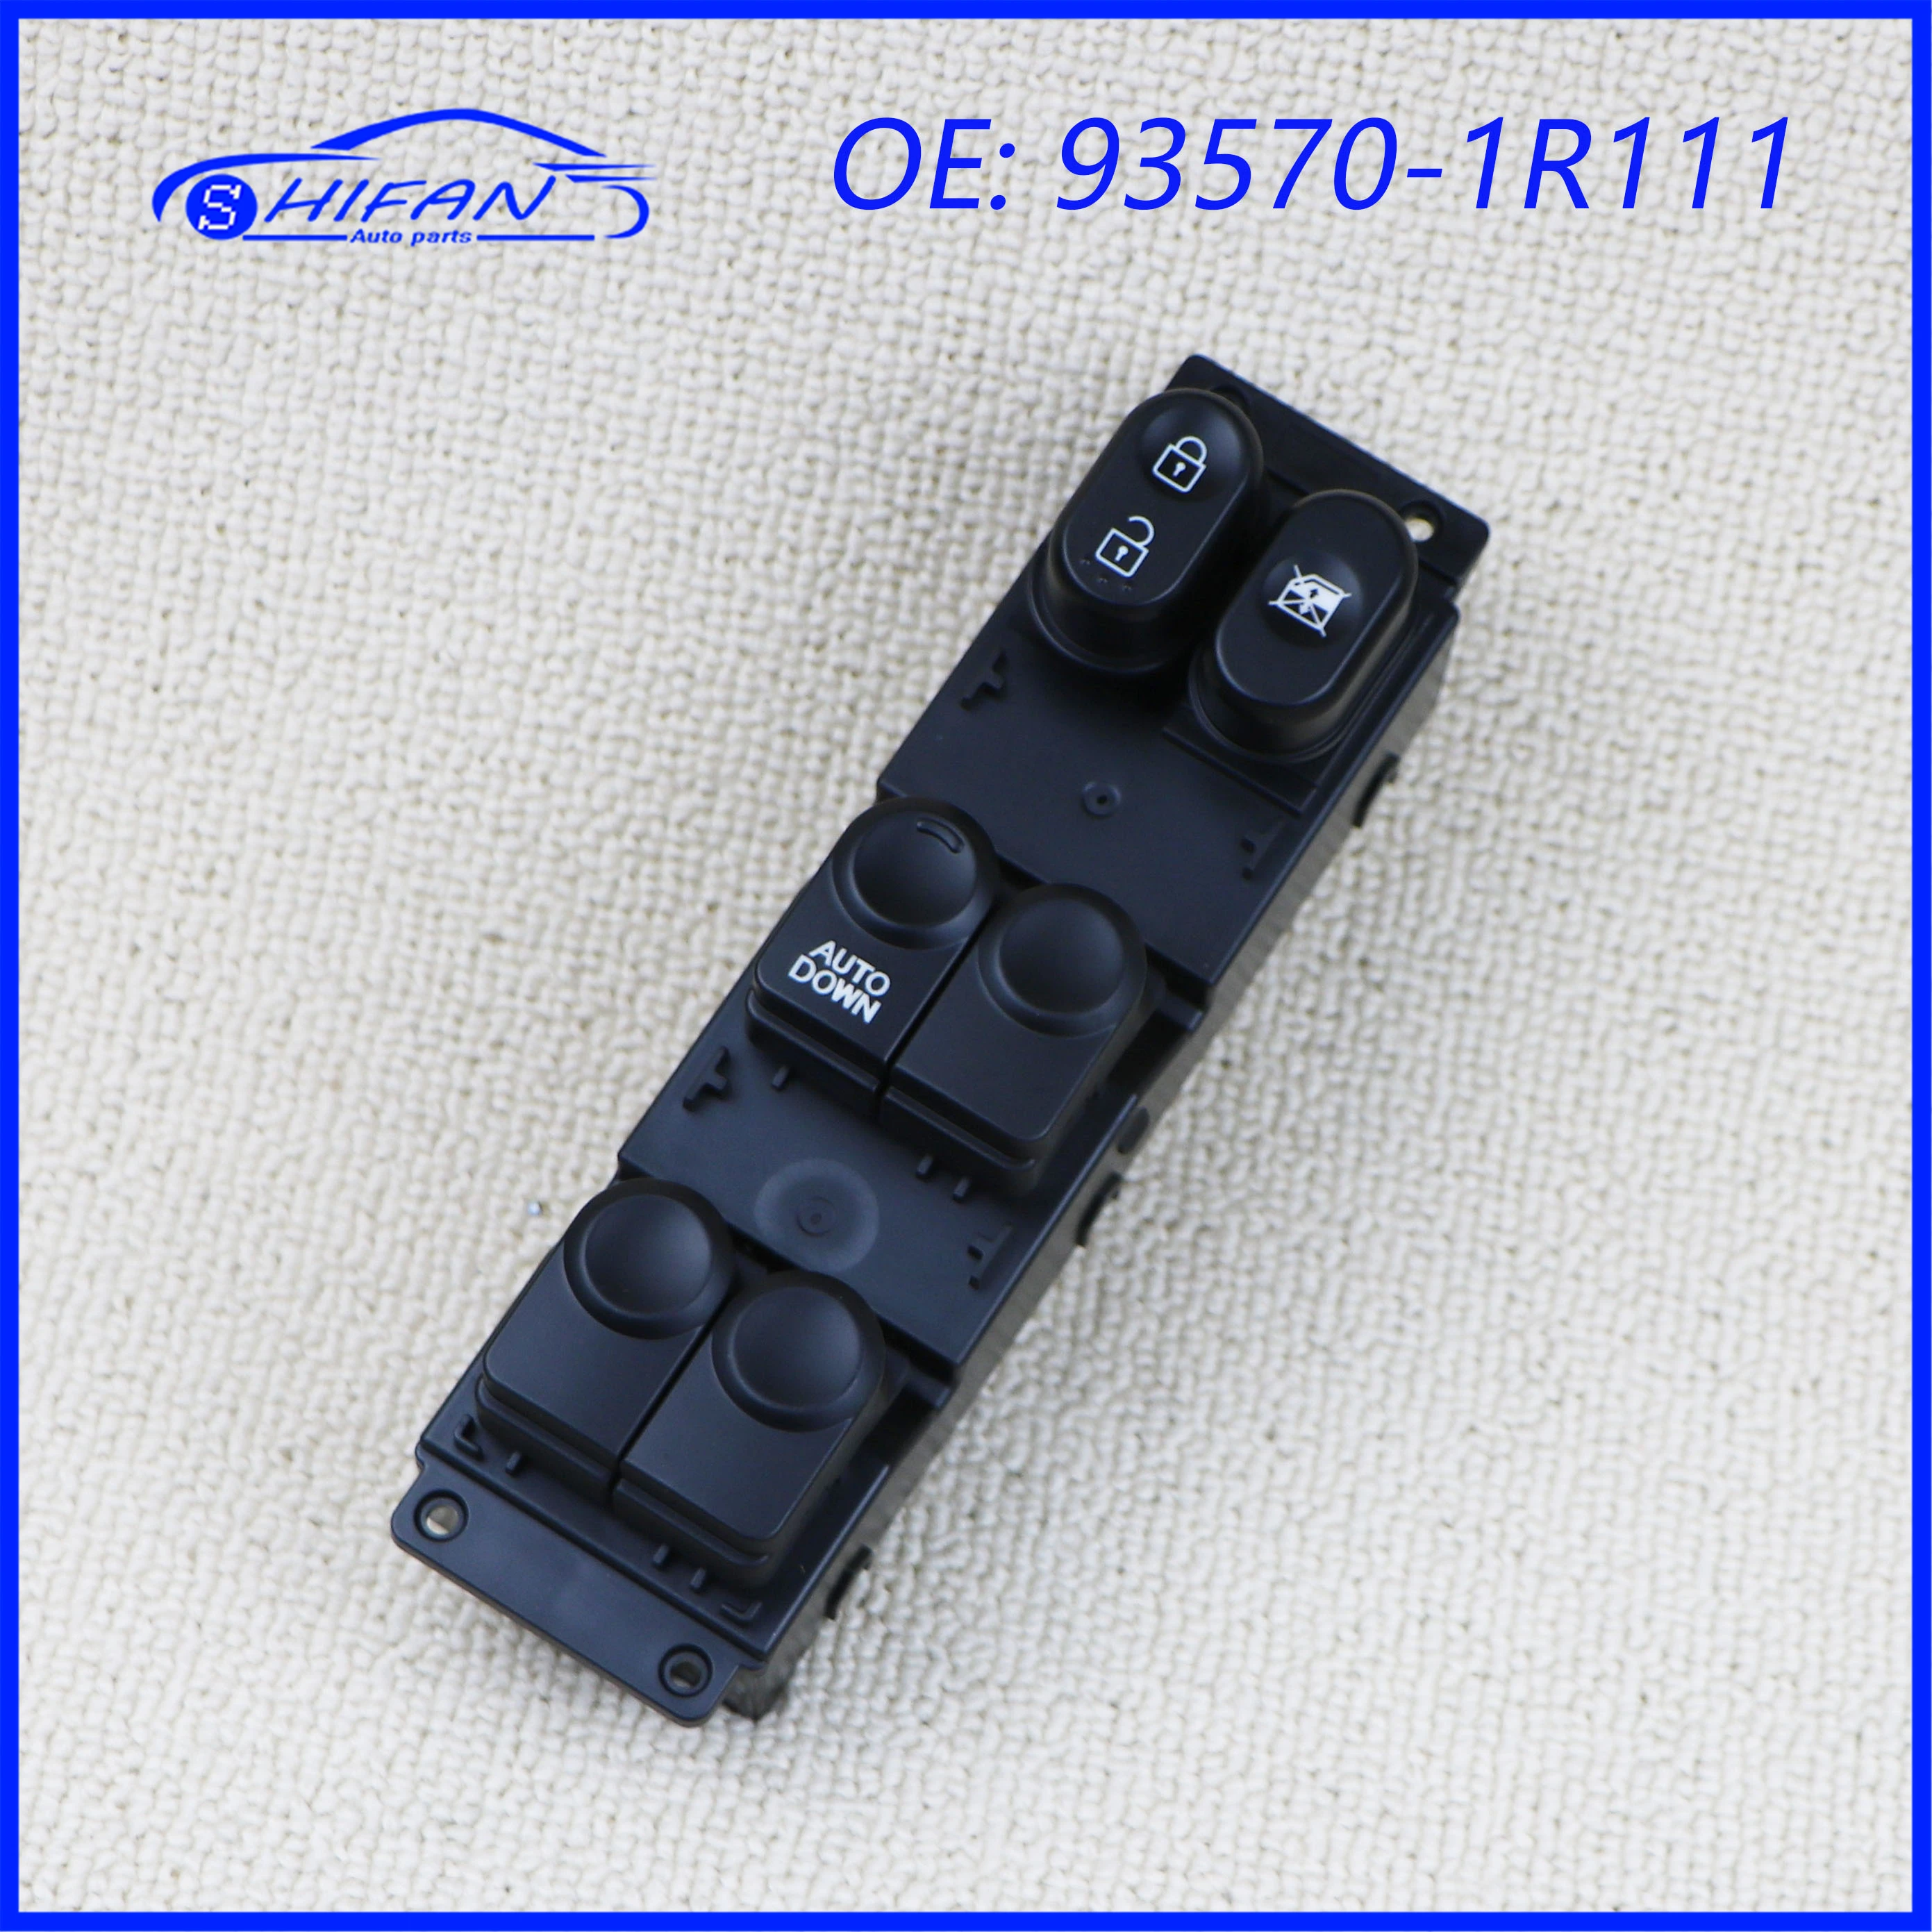 93570-1R111 Car Power Window Control Switch Electric Switch For Hyundai Accent 2010-2017 Car Accessories 935701R111 fit for skoda kodiaq 2017 2018 abs carbon fibre door window glass lift control switch panel cover trim car styling accessories